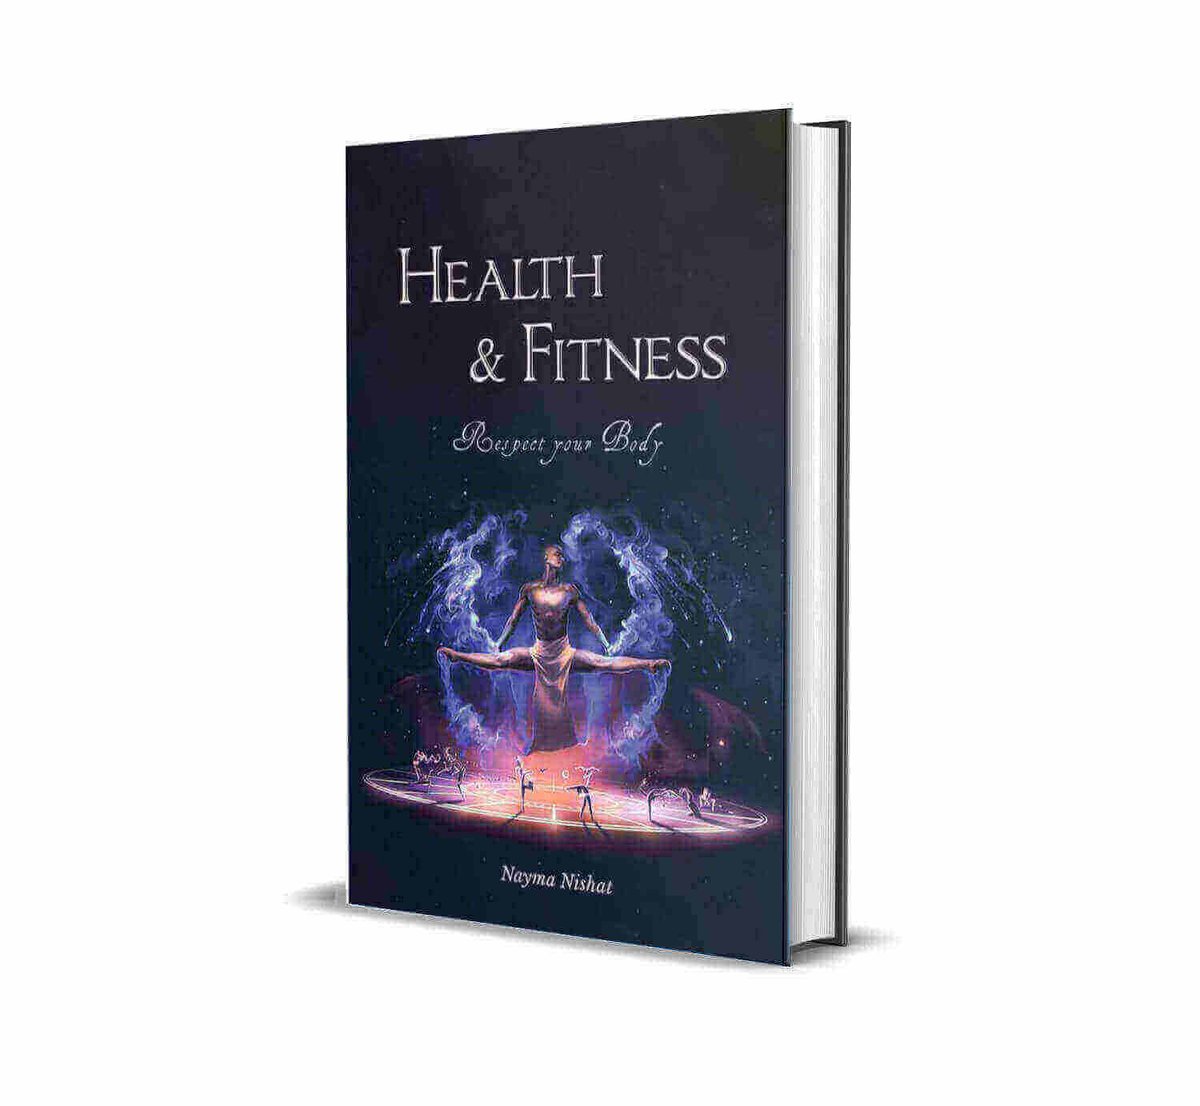 The Health & Fitness Book By Nayma Nishat on Published The World Book.

Read the book: theworldbook.org/the-health-and…

#HealthFitnessBook #NaymaNishat #TheWorldBook